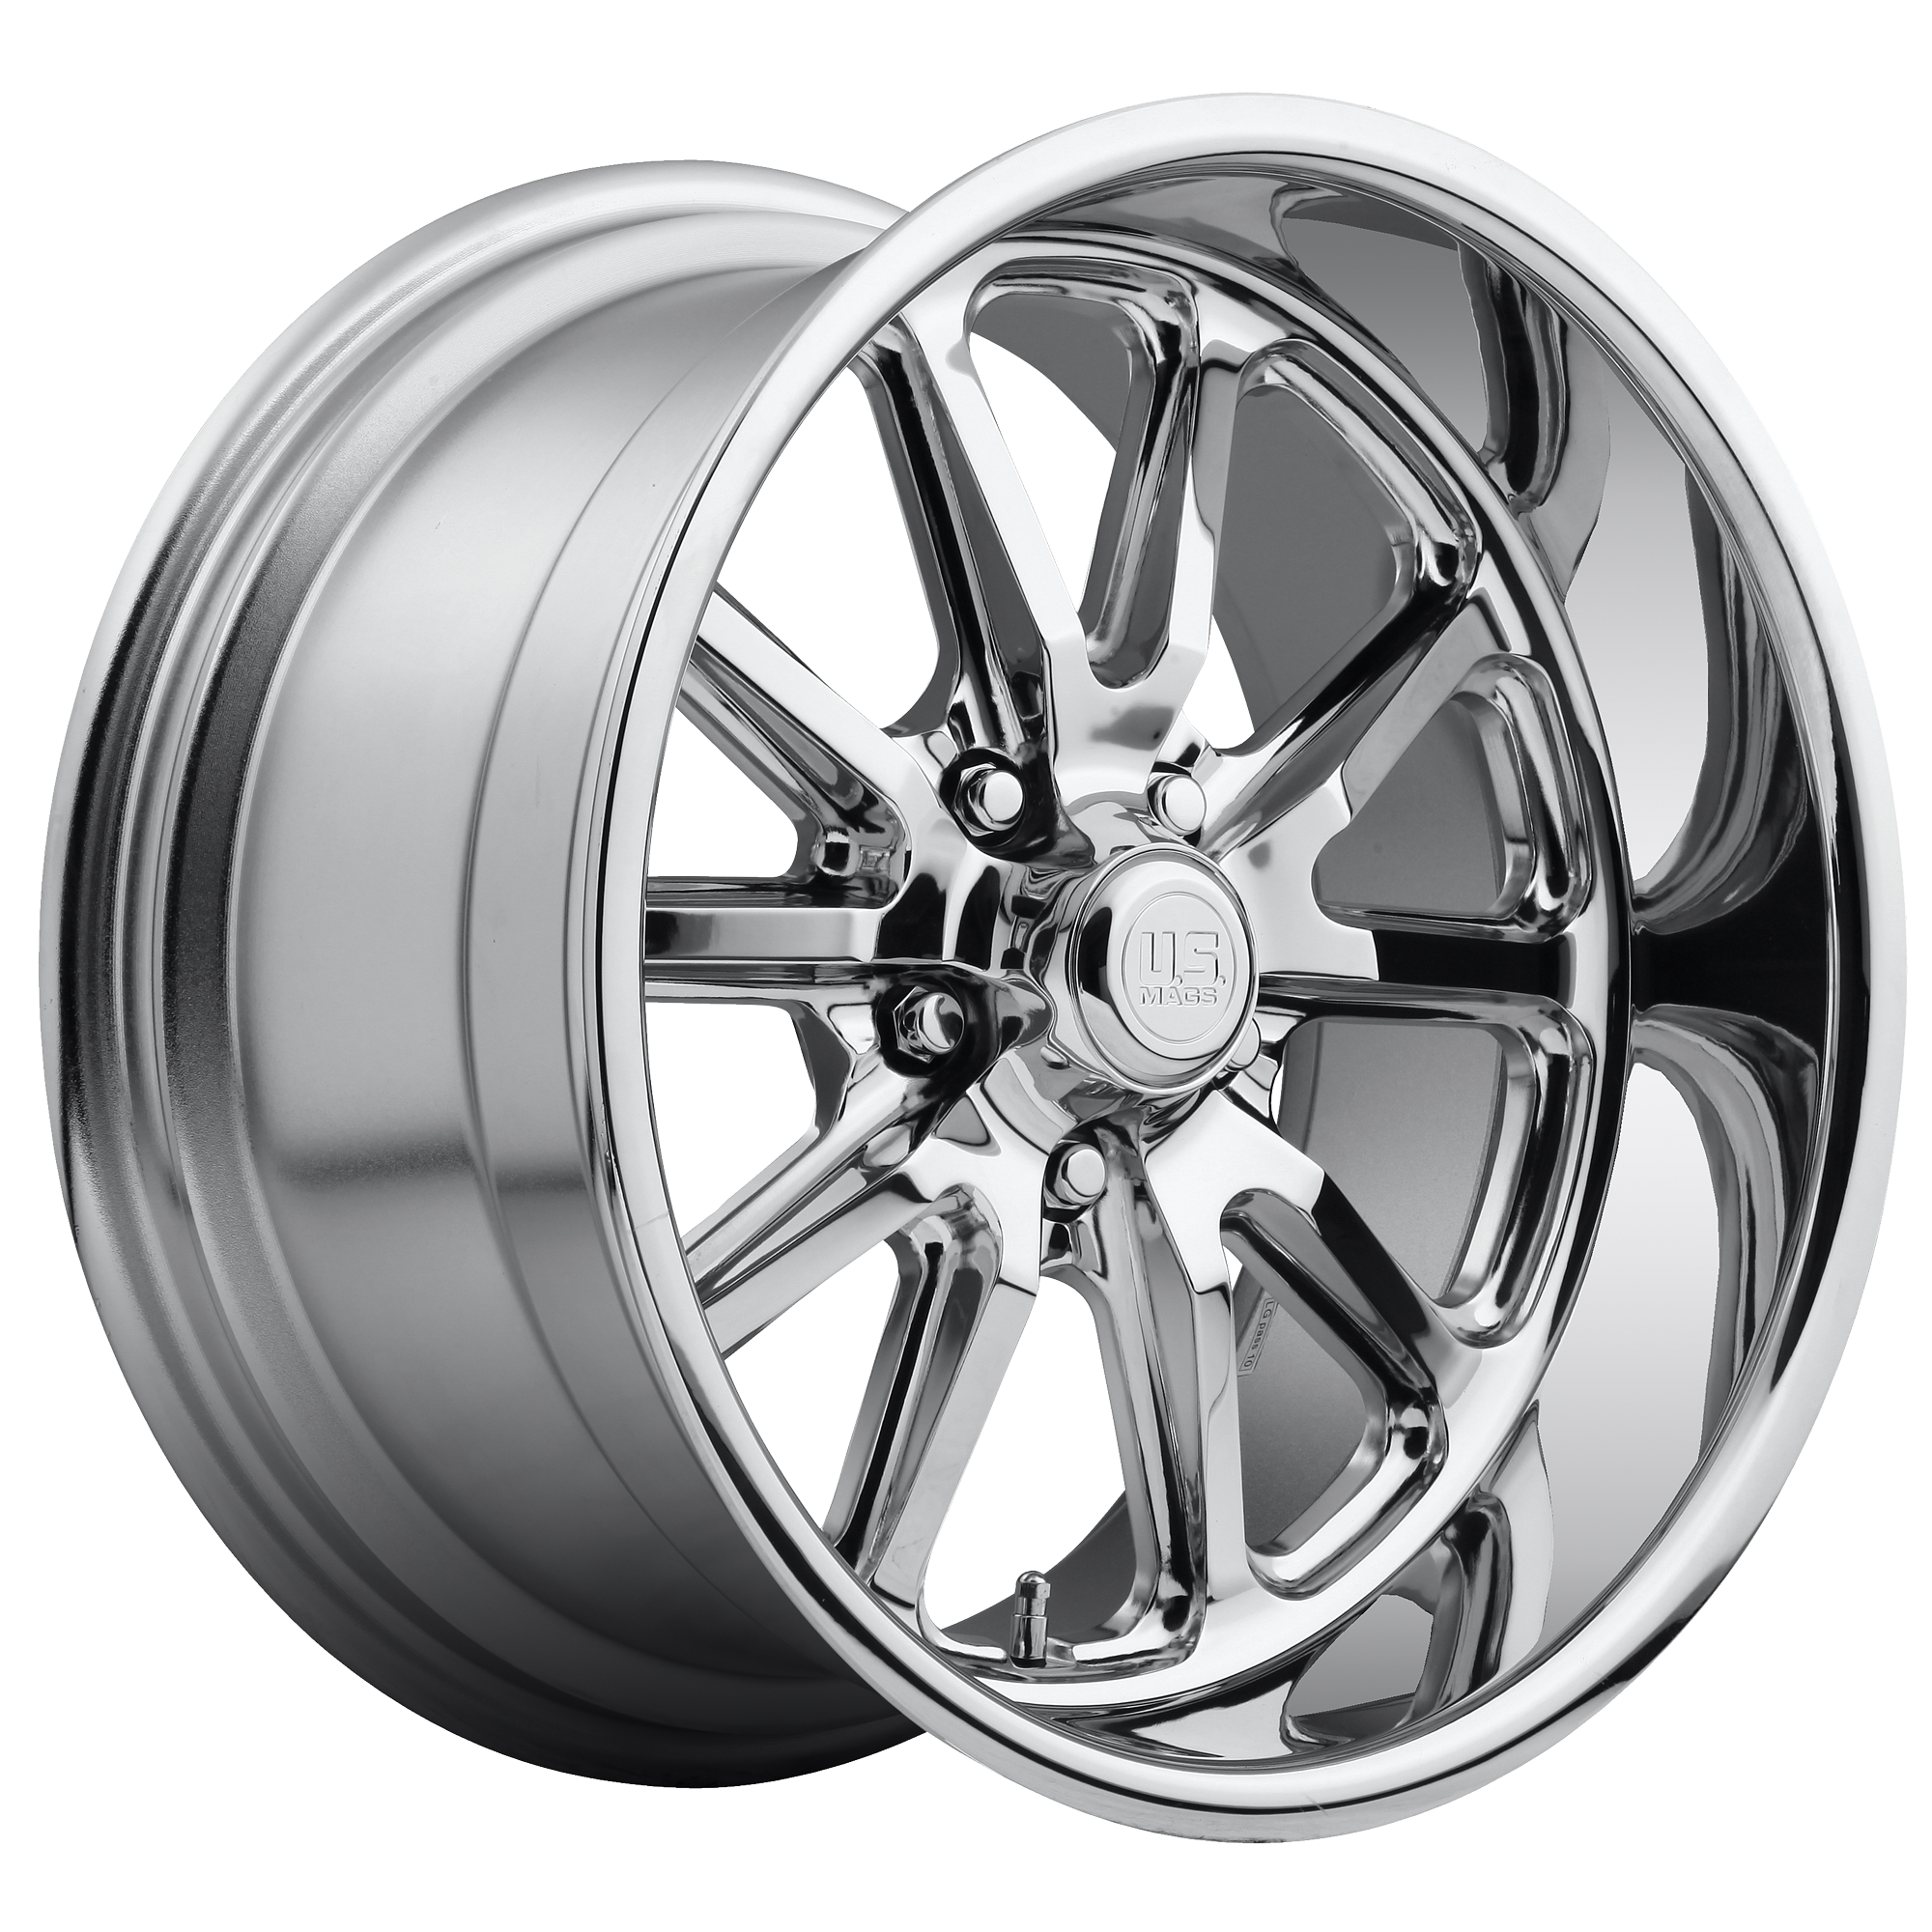 RAMBLER 18x8 5x127.00 CHROME PLATED (1 mm) - Tires and Engine Performance